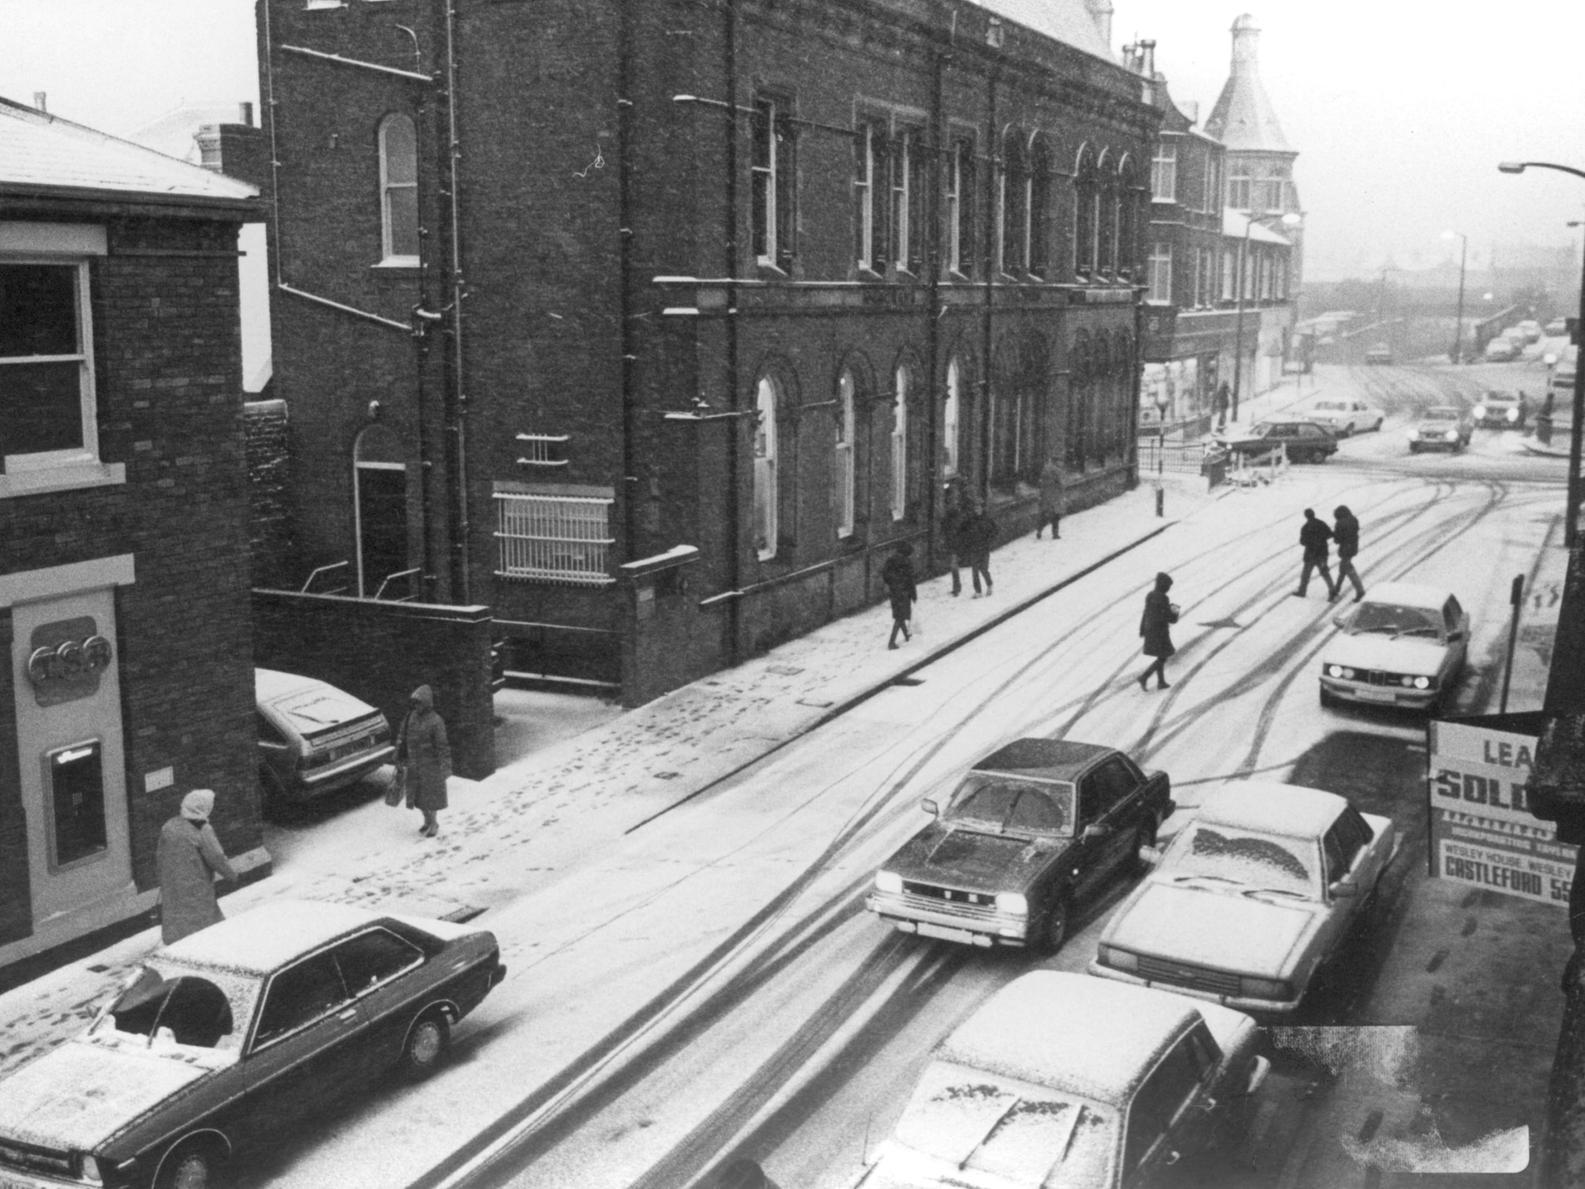 A very snowy Bank Street in 1970s Castleford